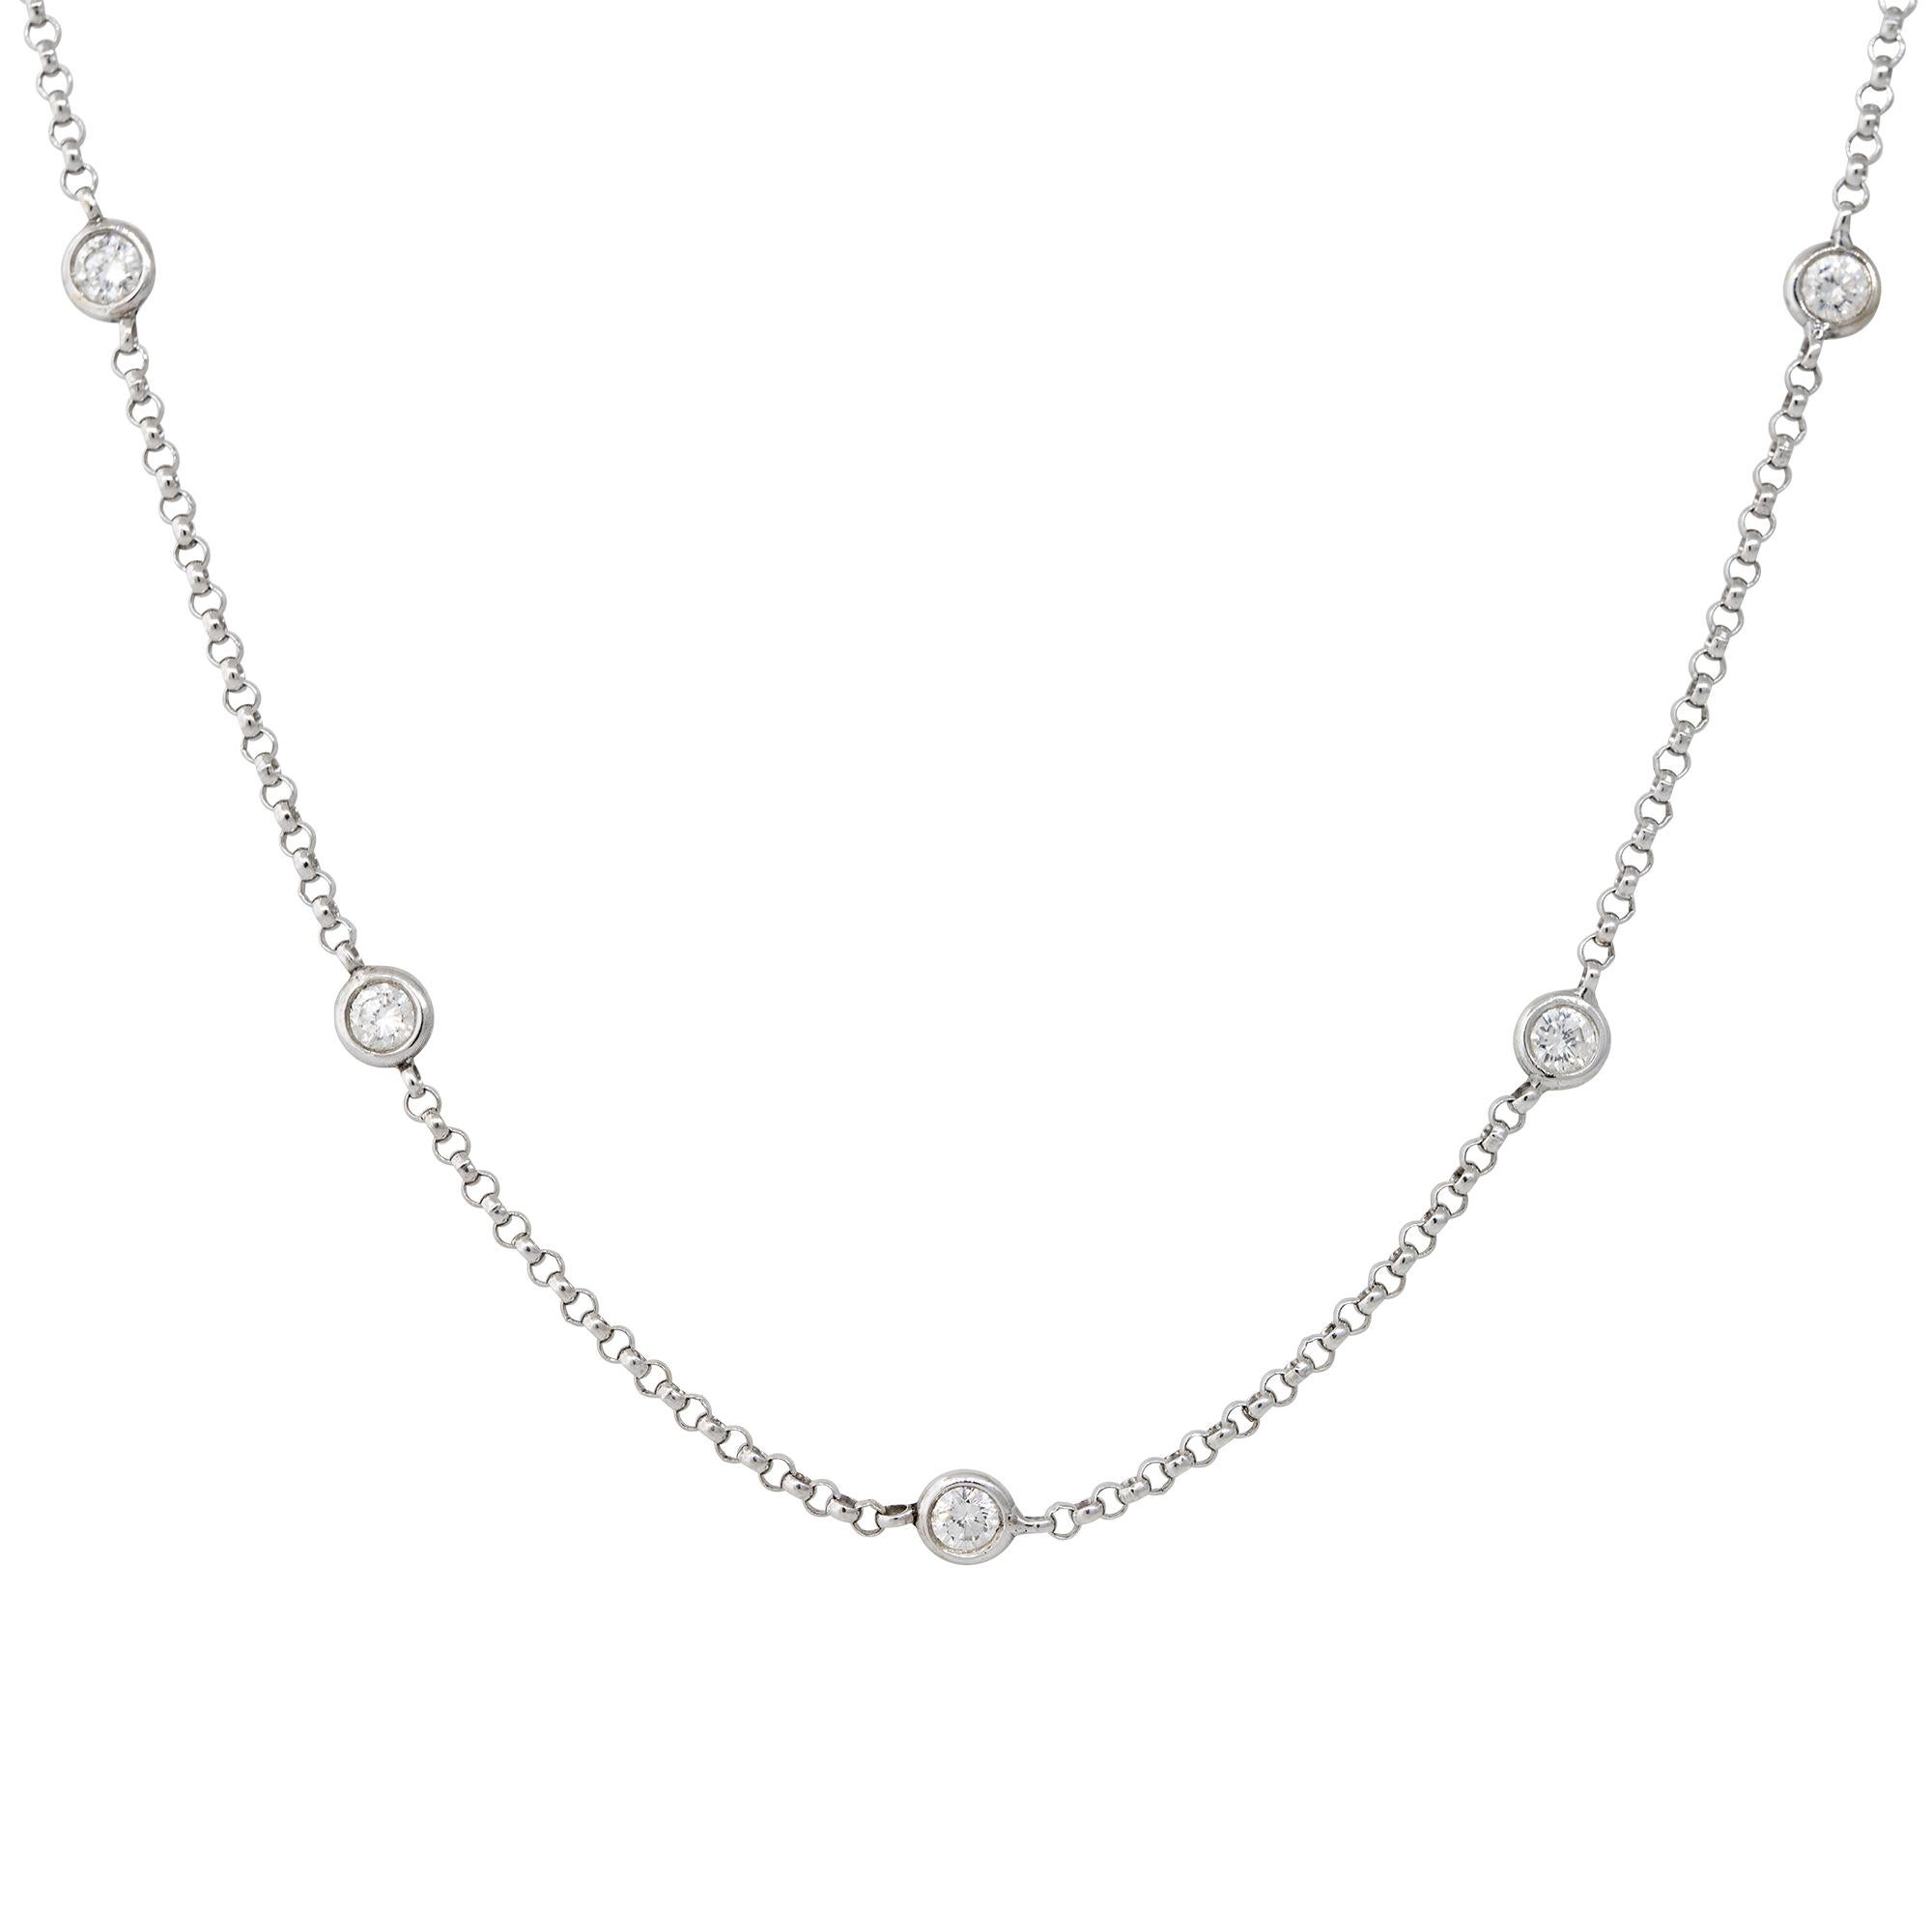 Modern 0.36 Carat Round Brilliant Diamonds By The Yard Necklace 18 Karat In Stock For Sale